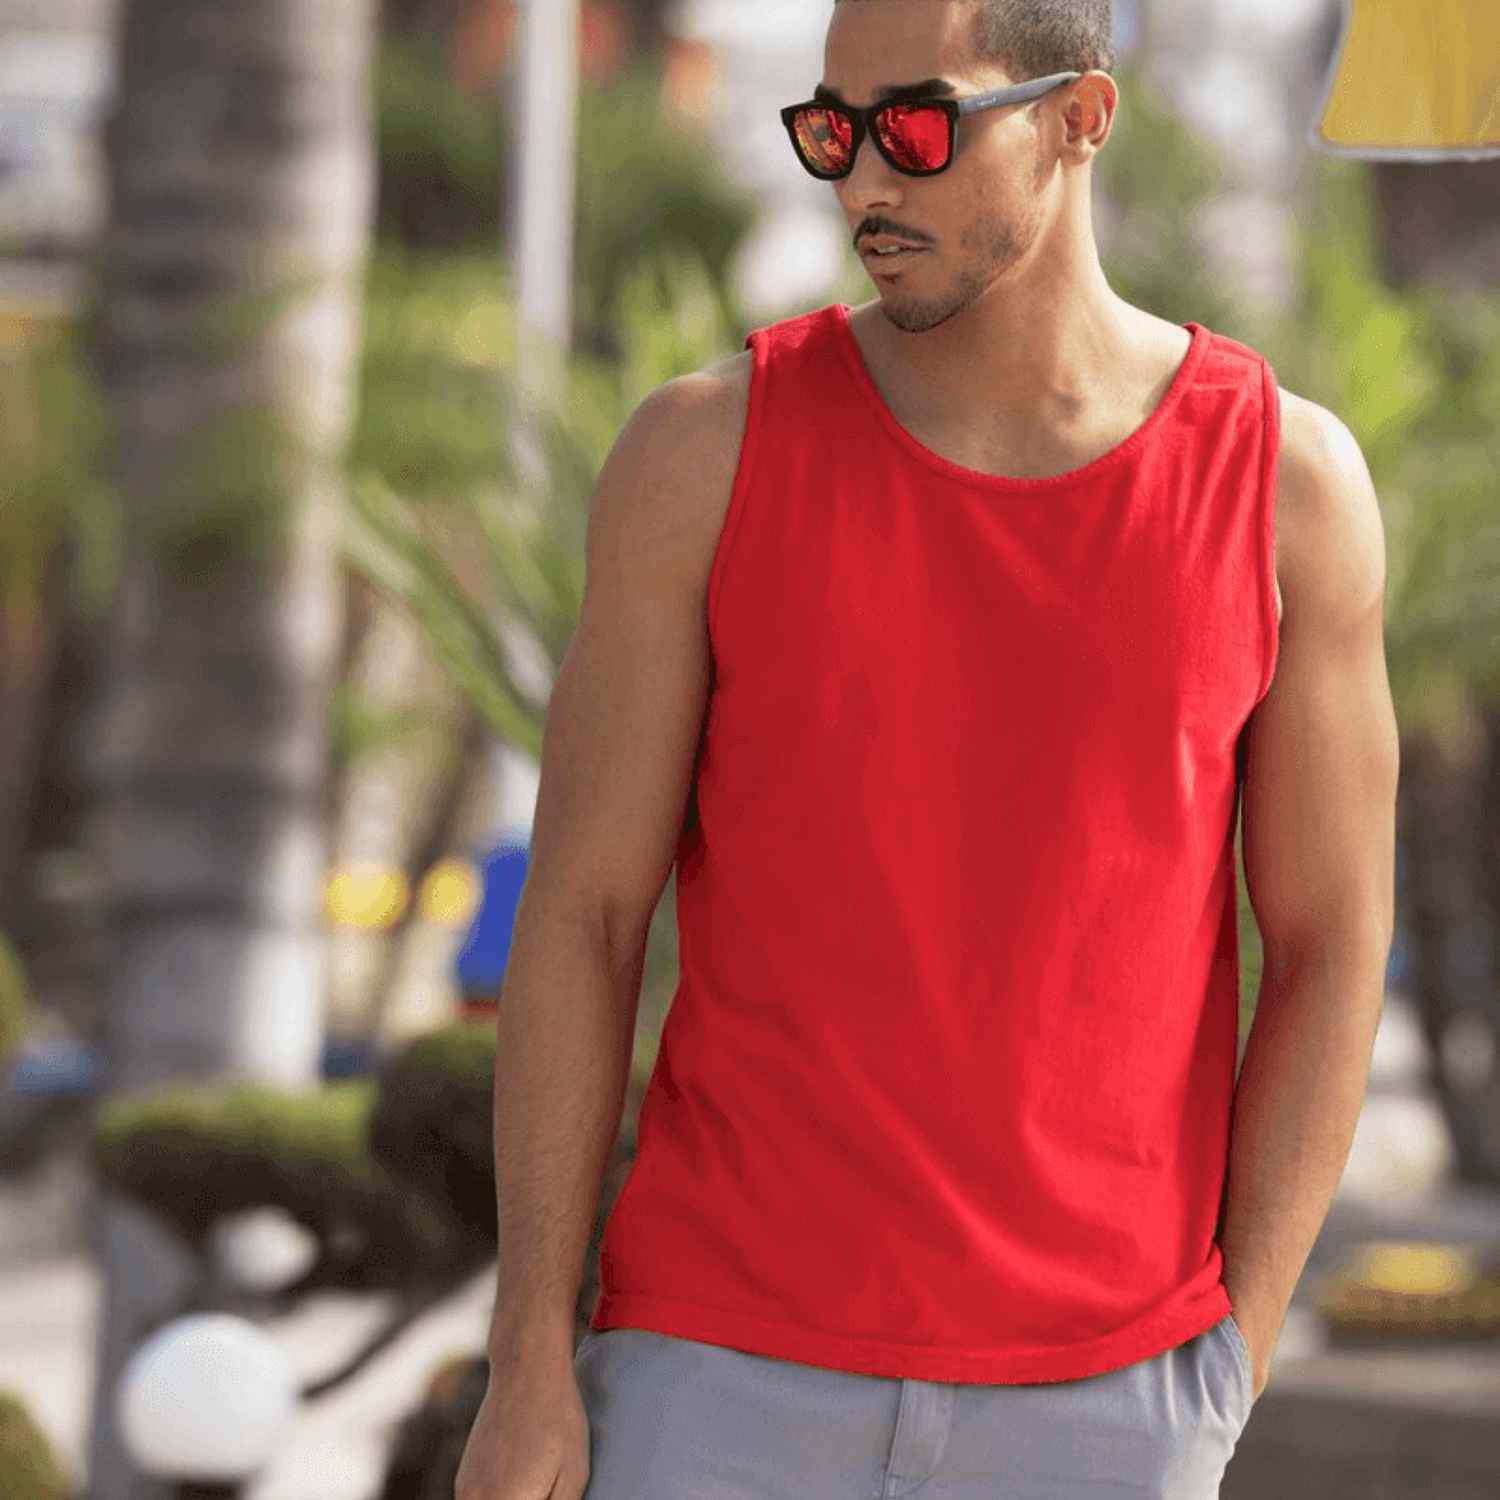 A man in sunglasses is wearing a red tank top and looking off into the distance.